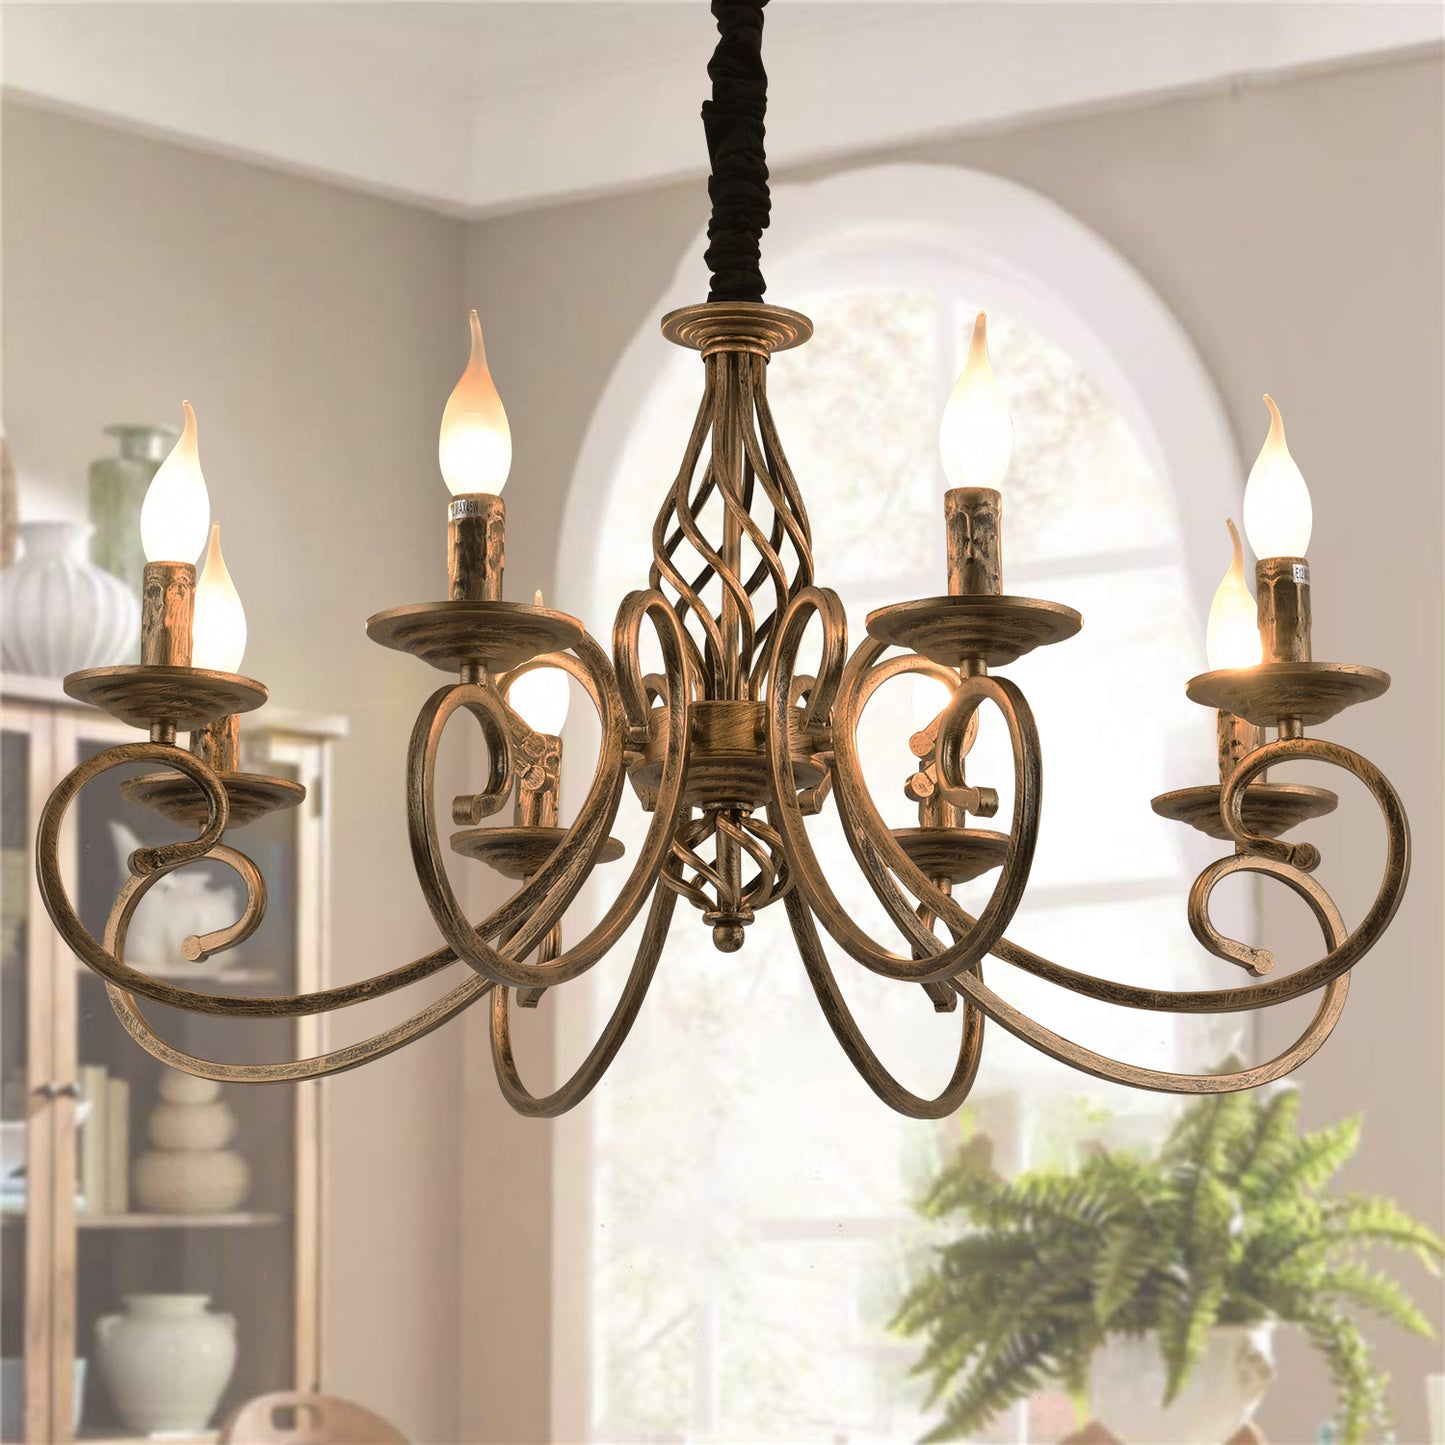 Detailed clofrench country wrought iron chandelier with bronze finish shown hung in close up